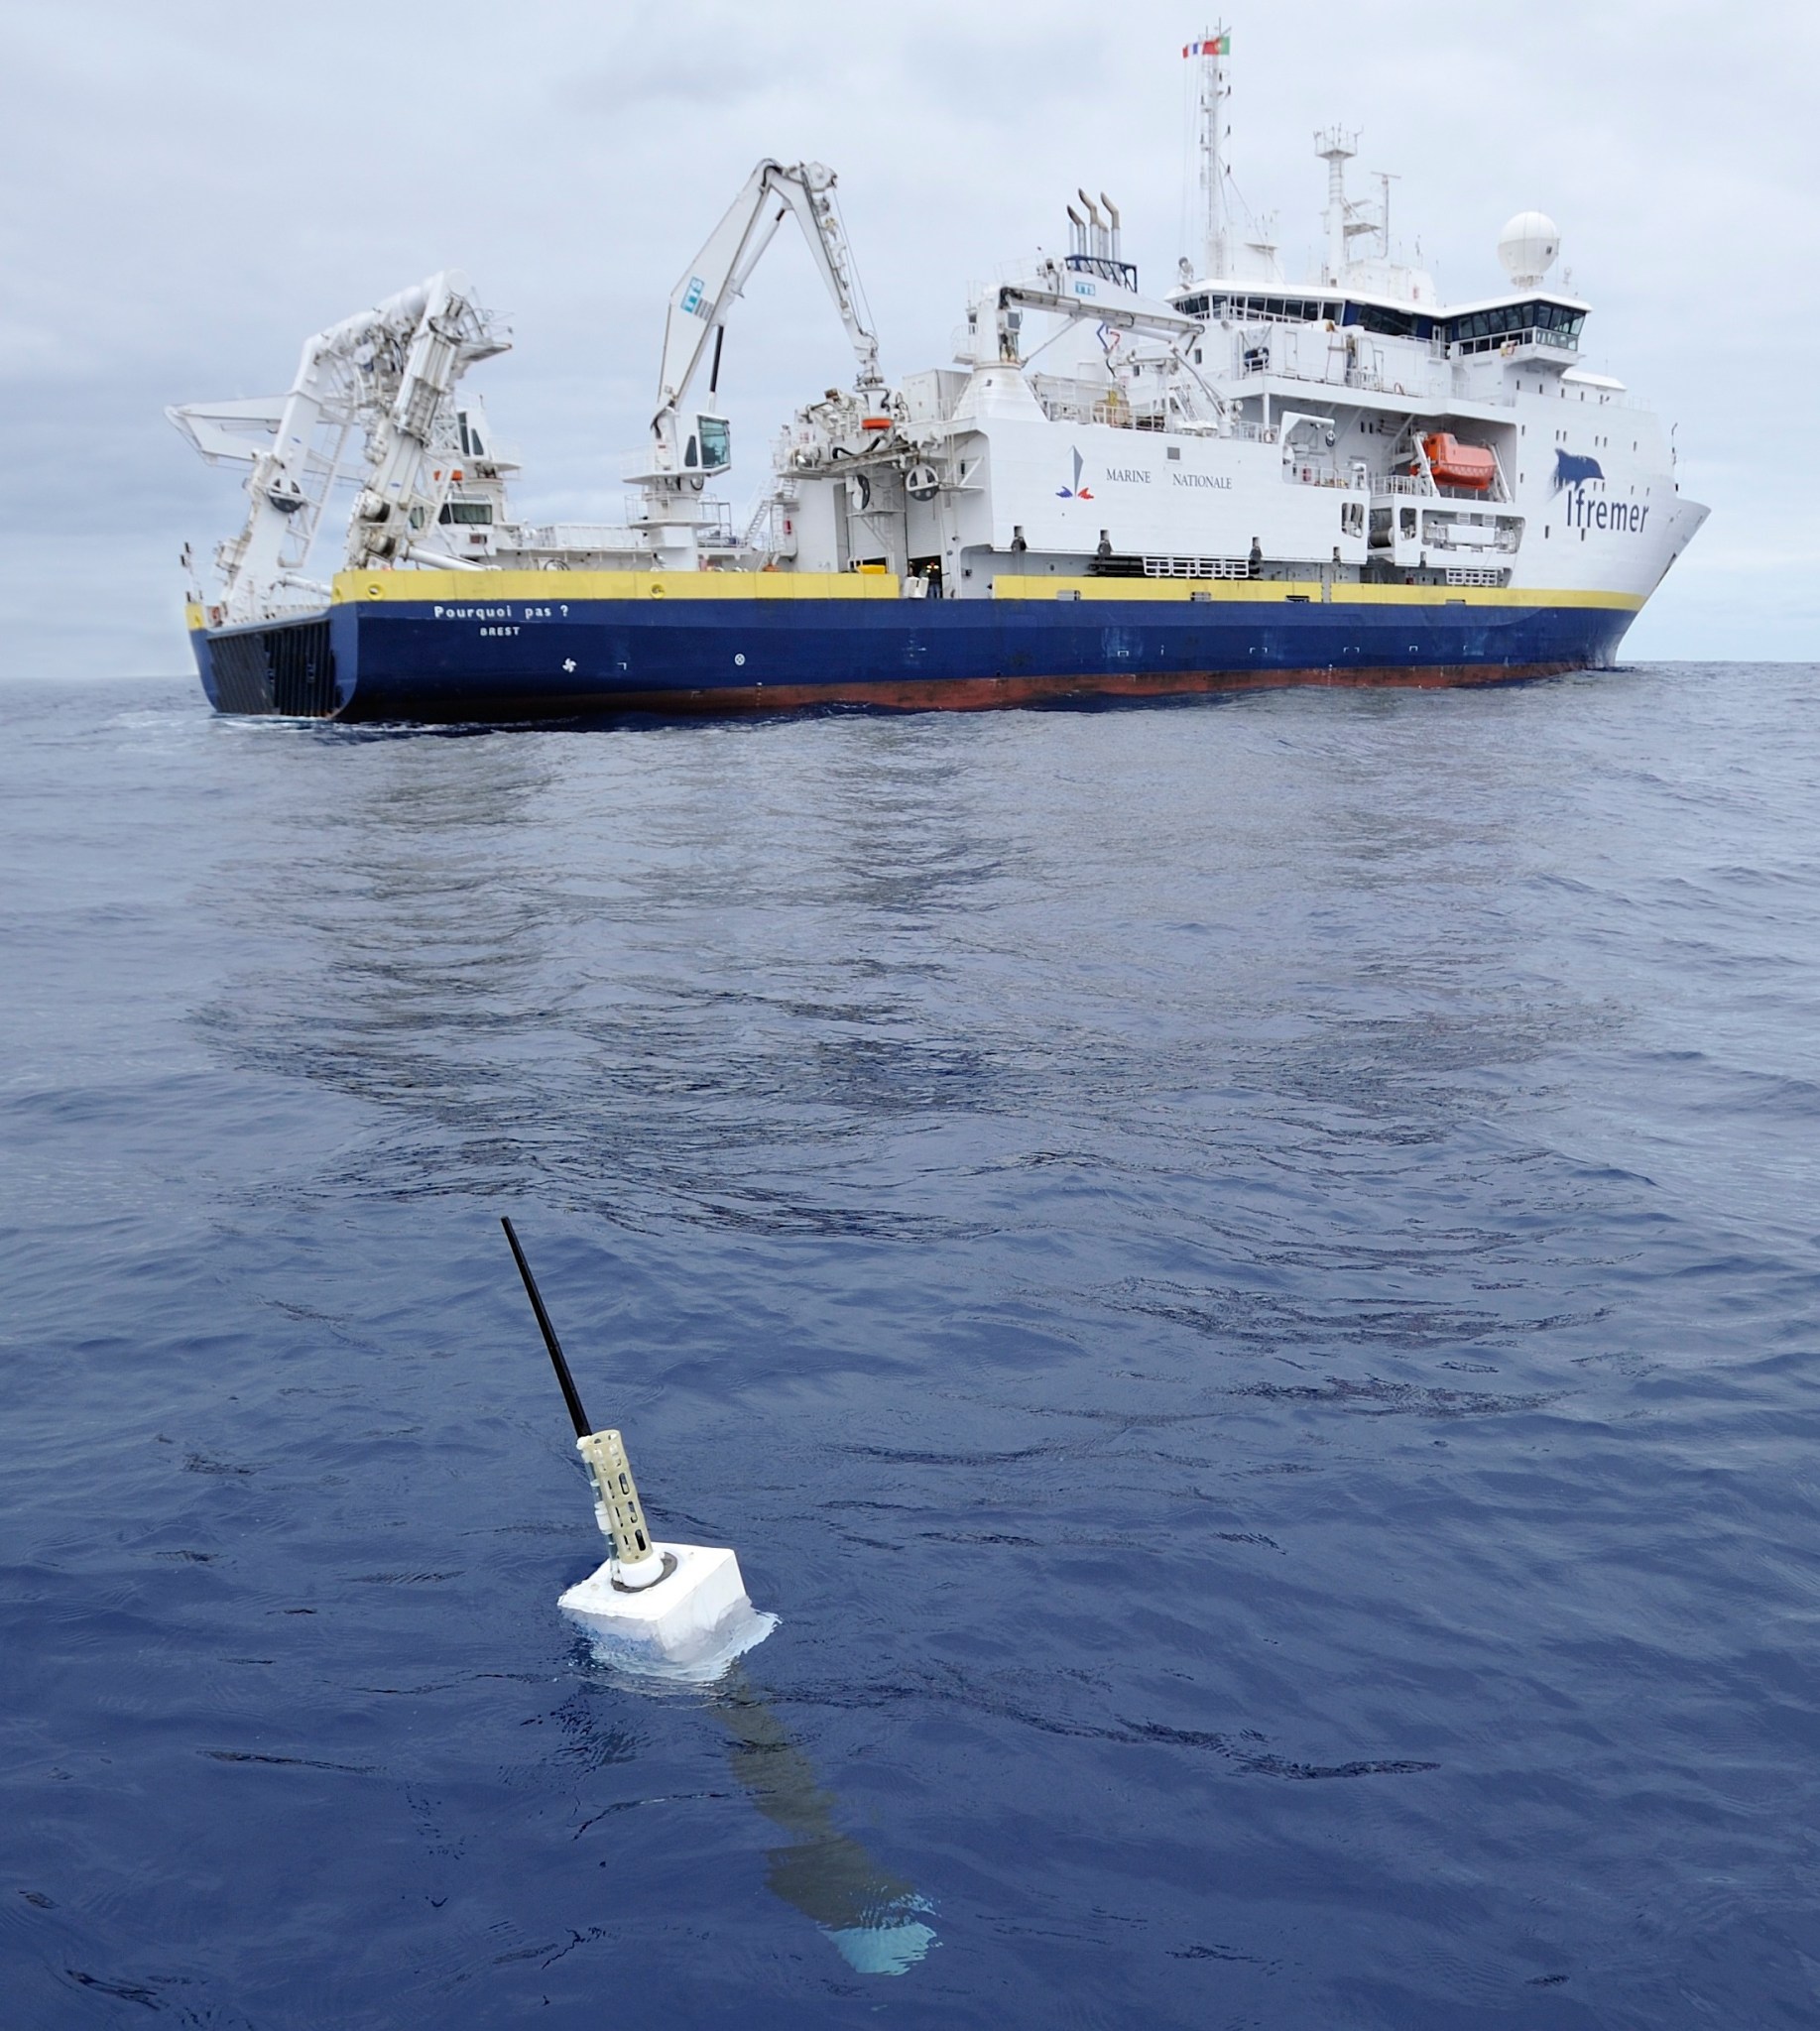 The new study used ocean temperature measurements from a global array of 3,500 Argo floats and other ocean sensors.